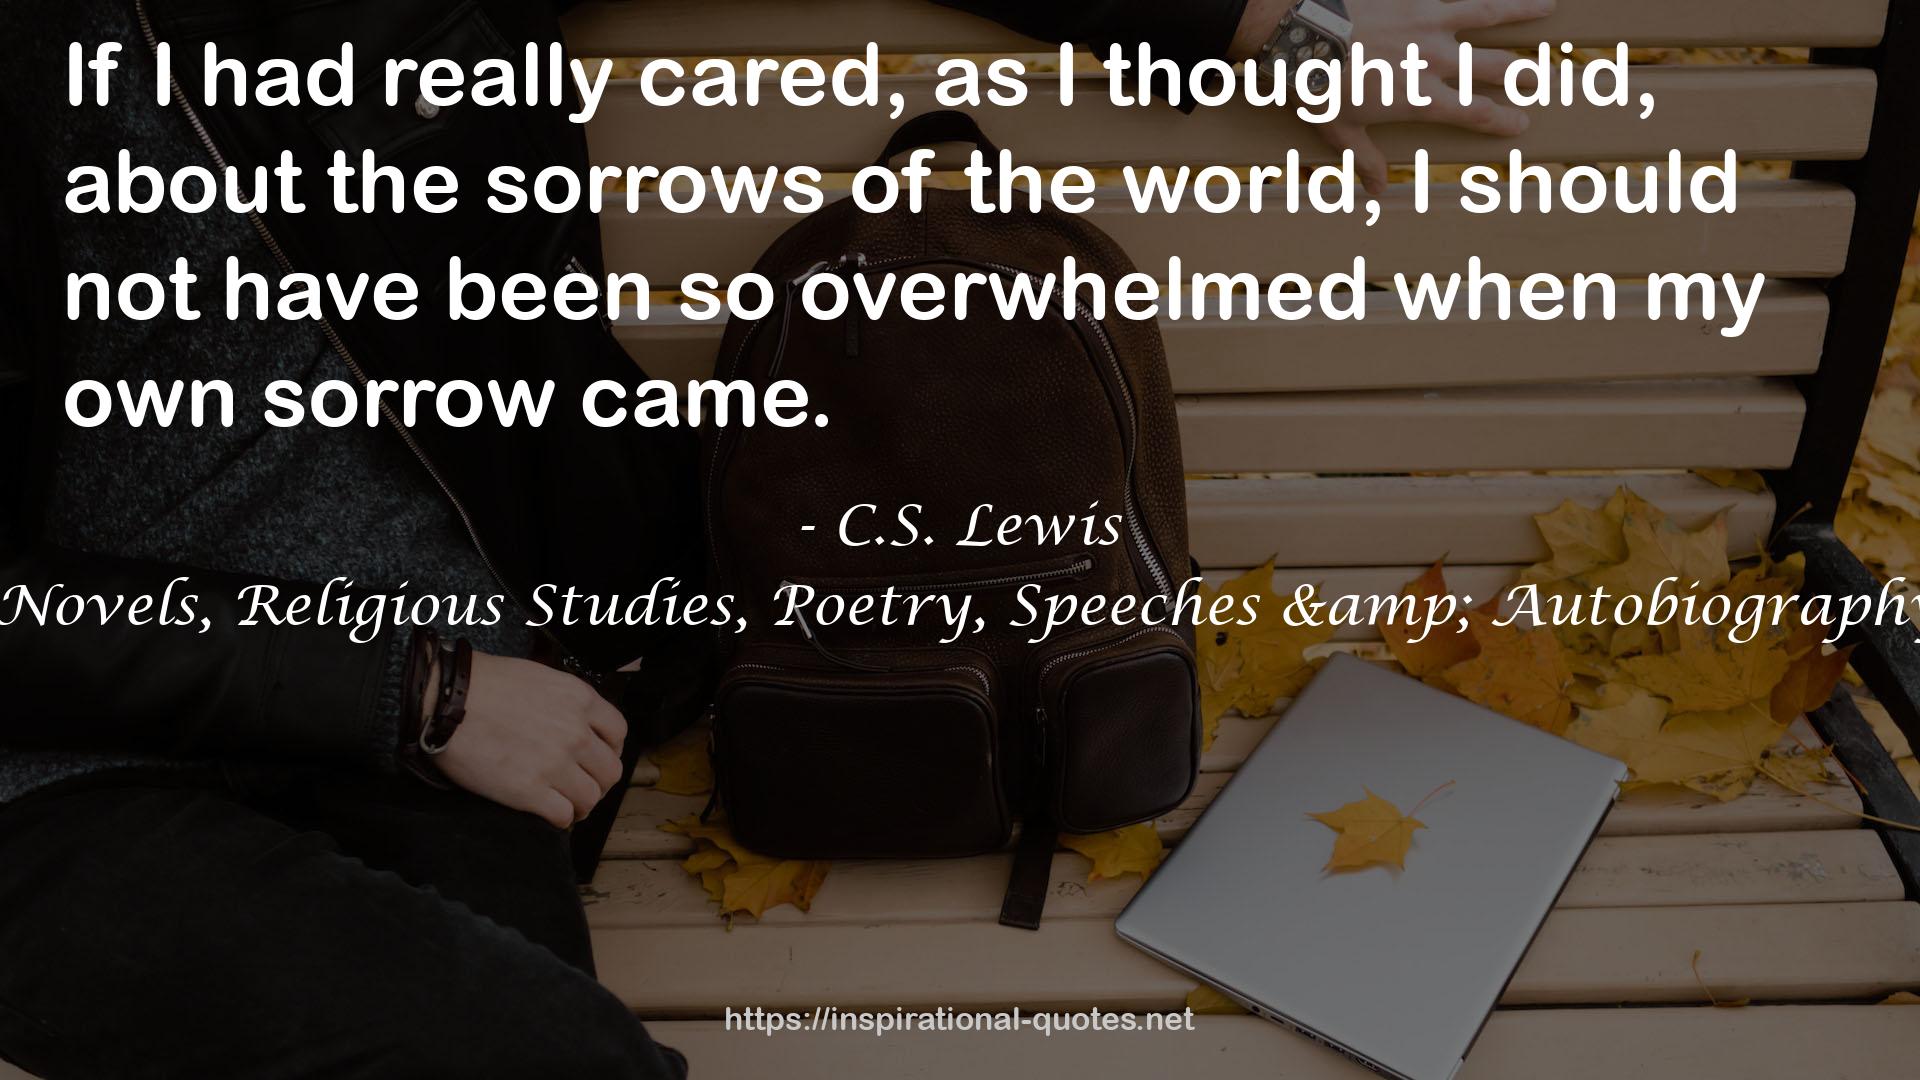 The Complete Works of C. S. Lewis: Fantasy Classics, Science Fiction Novels, Religious Studies, Poetry, Speeches & Autobiography: The Chronicles of Narnia, ... Letters, Mere Christianity, Miracles… QUOTES